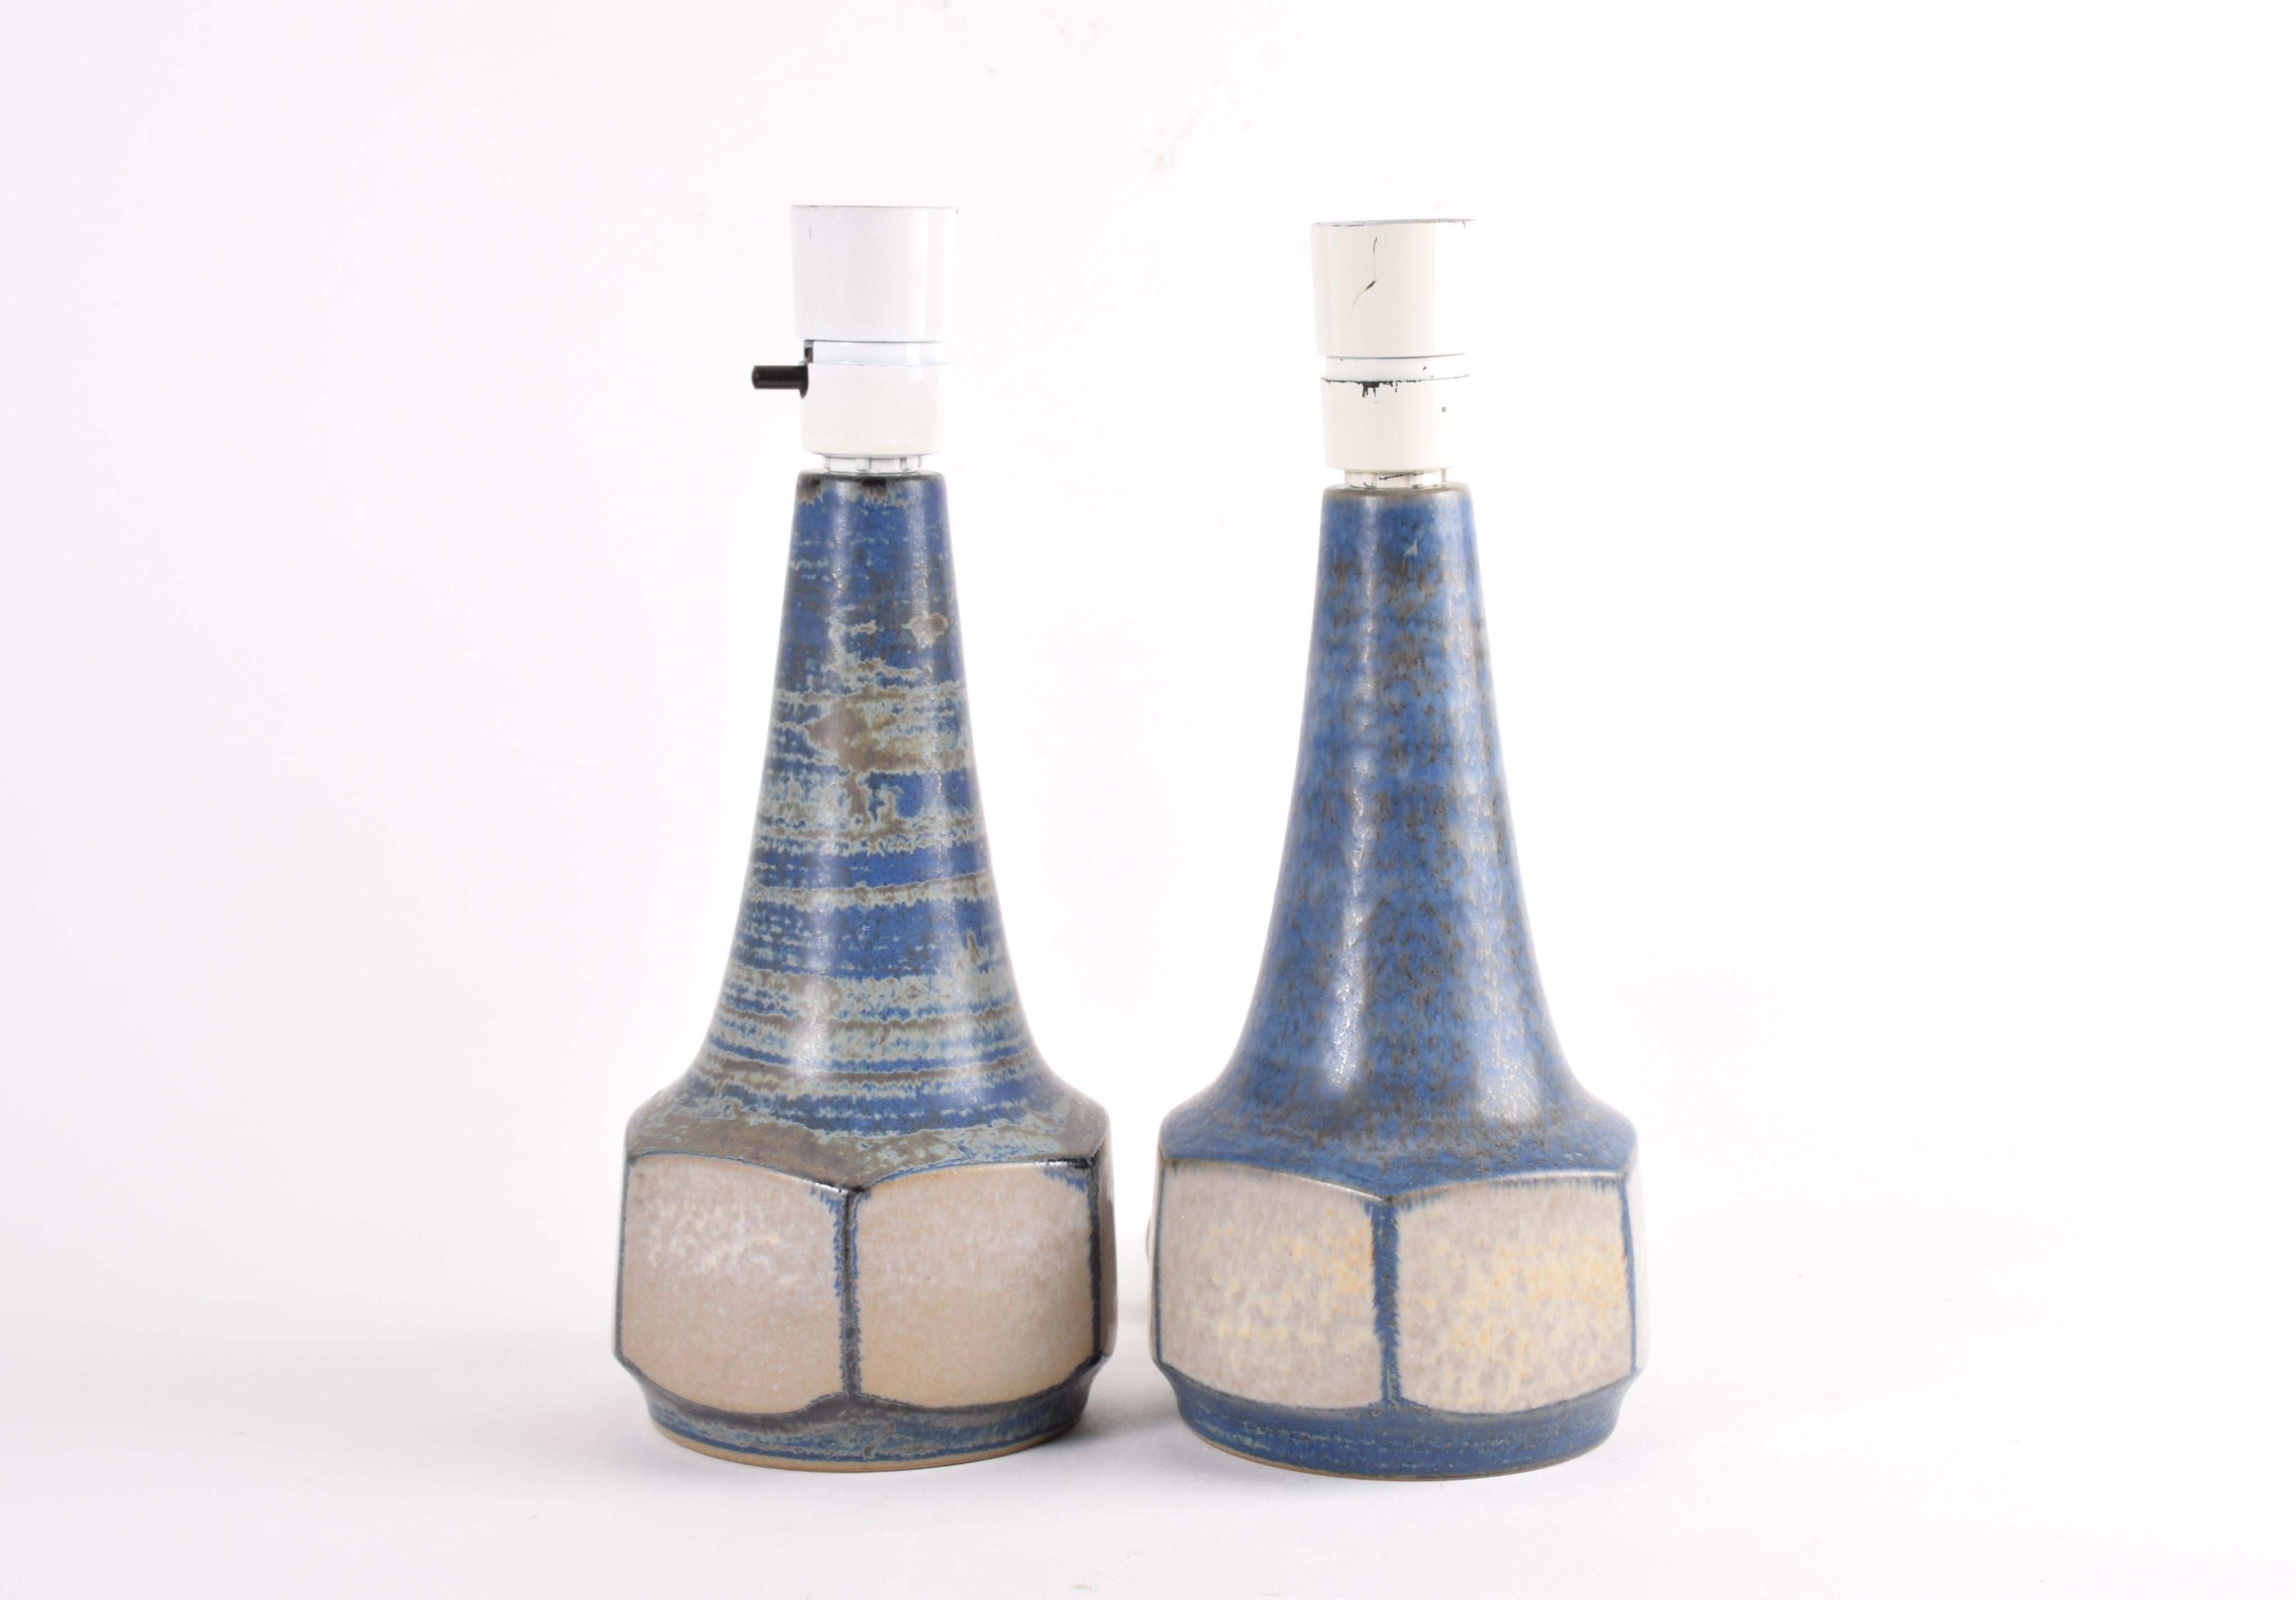 Mid-20th Century Pair of Michael Andersen Table Lamps by Marianne Starck, Danish Ceramic, 1960s